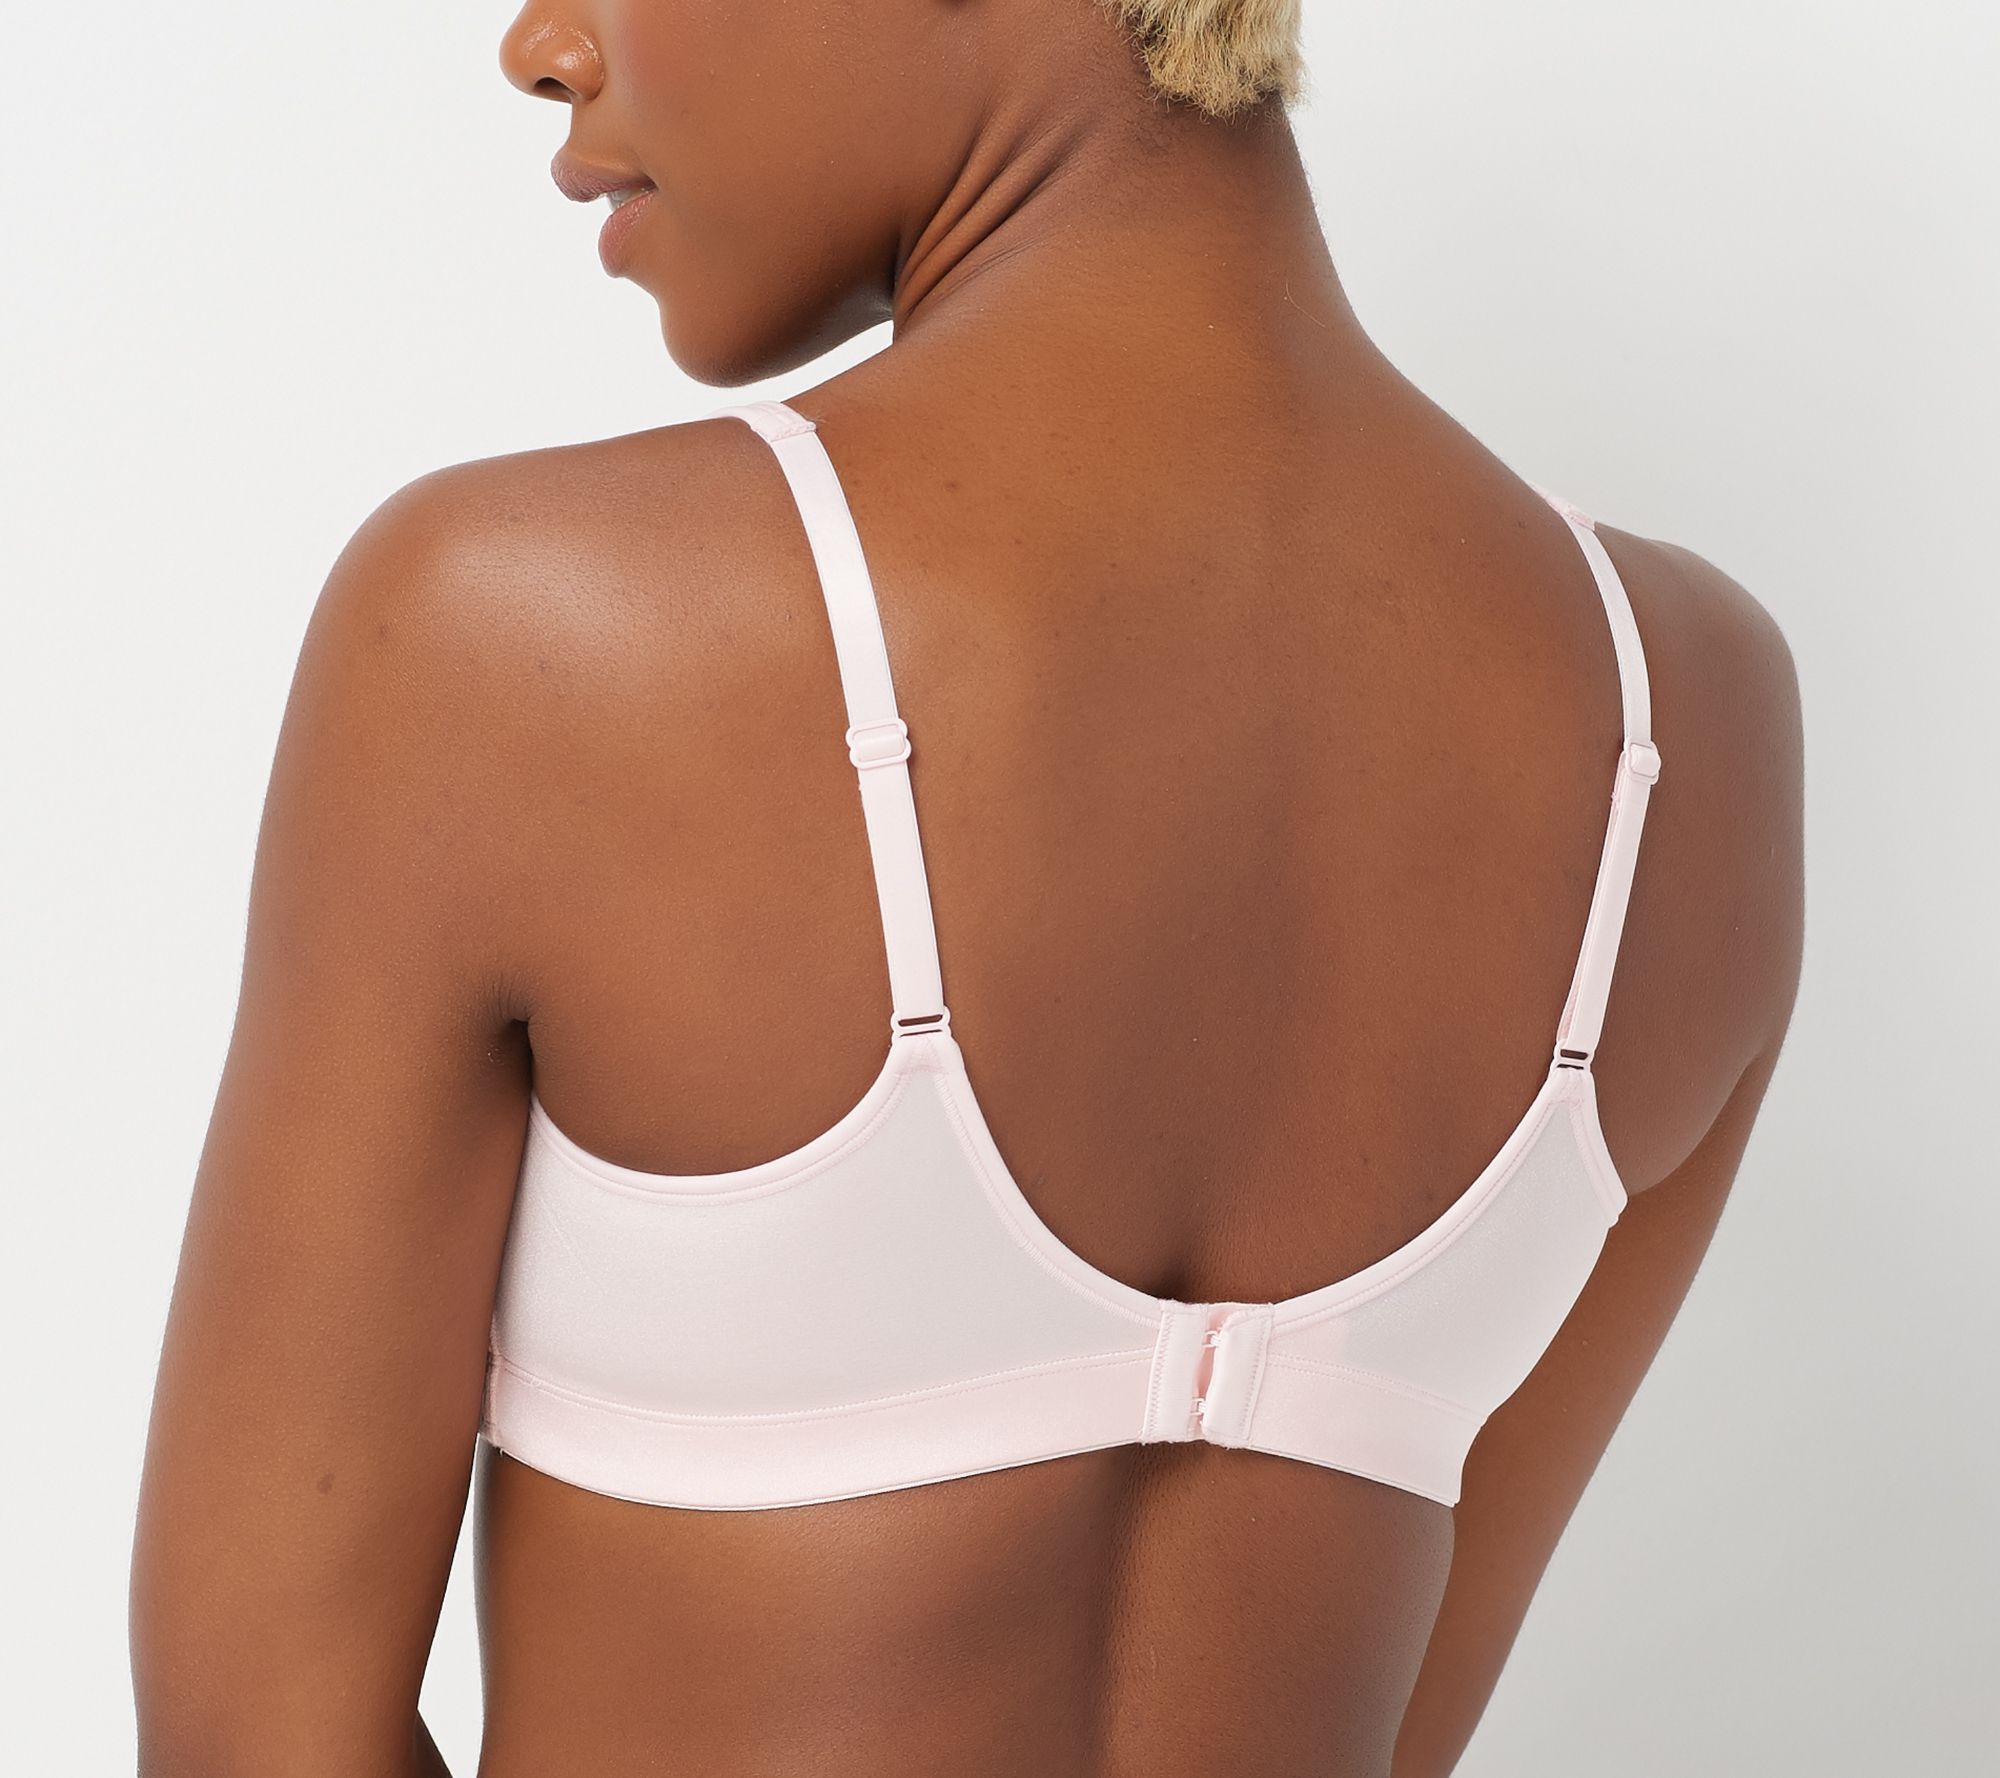 Breezies Jacquard Shine Unlined Wirefree Support Bra